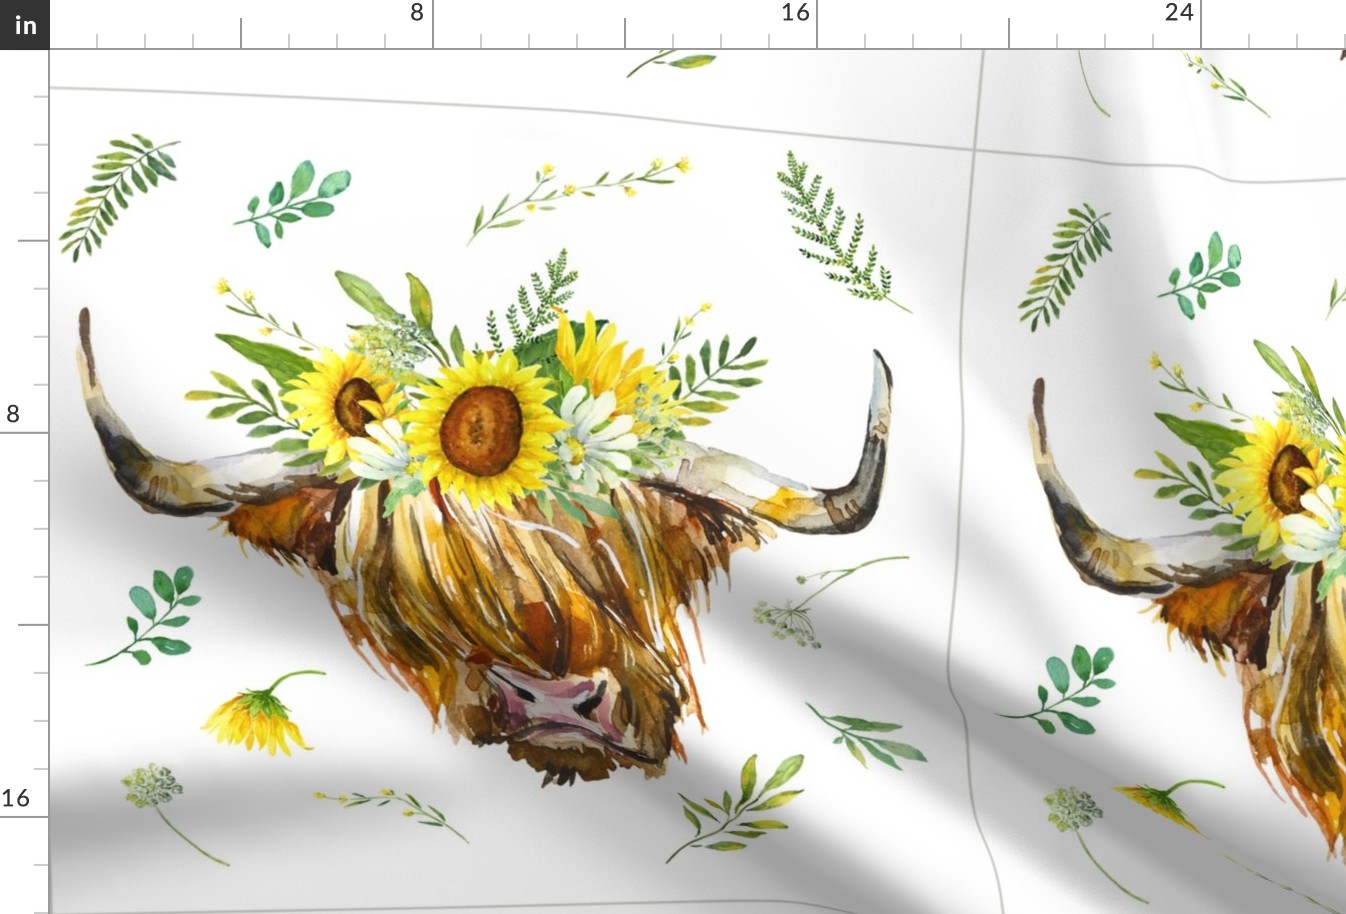 Highland Cow with a Sunflower Garland and scattered florals - 6 loveys 